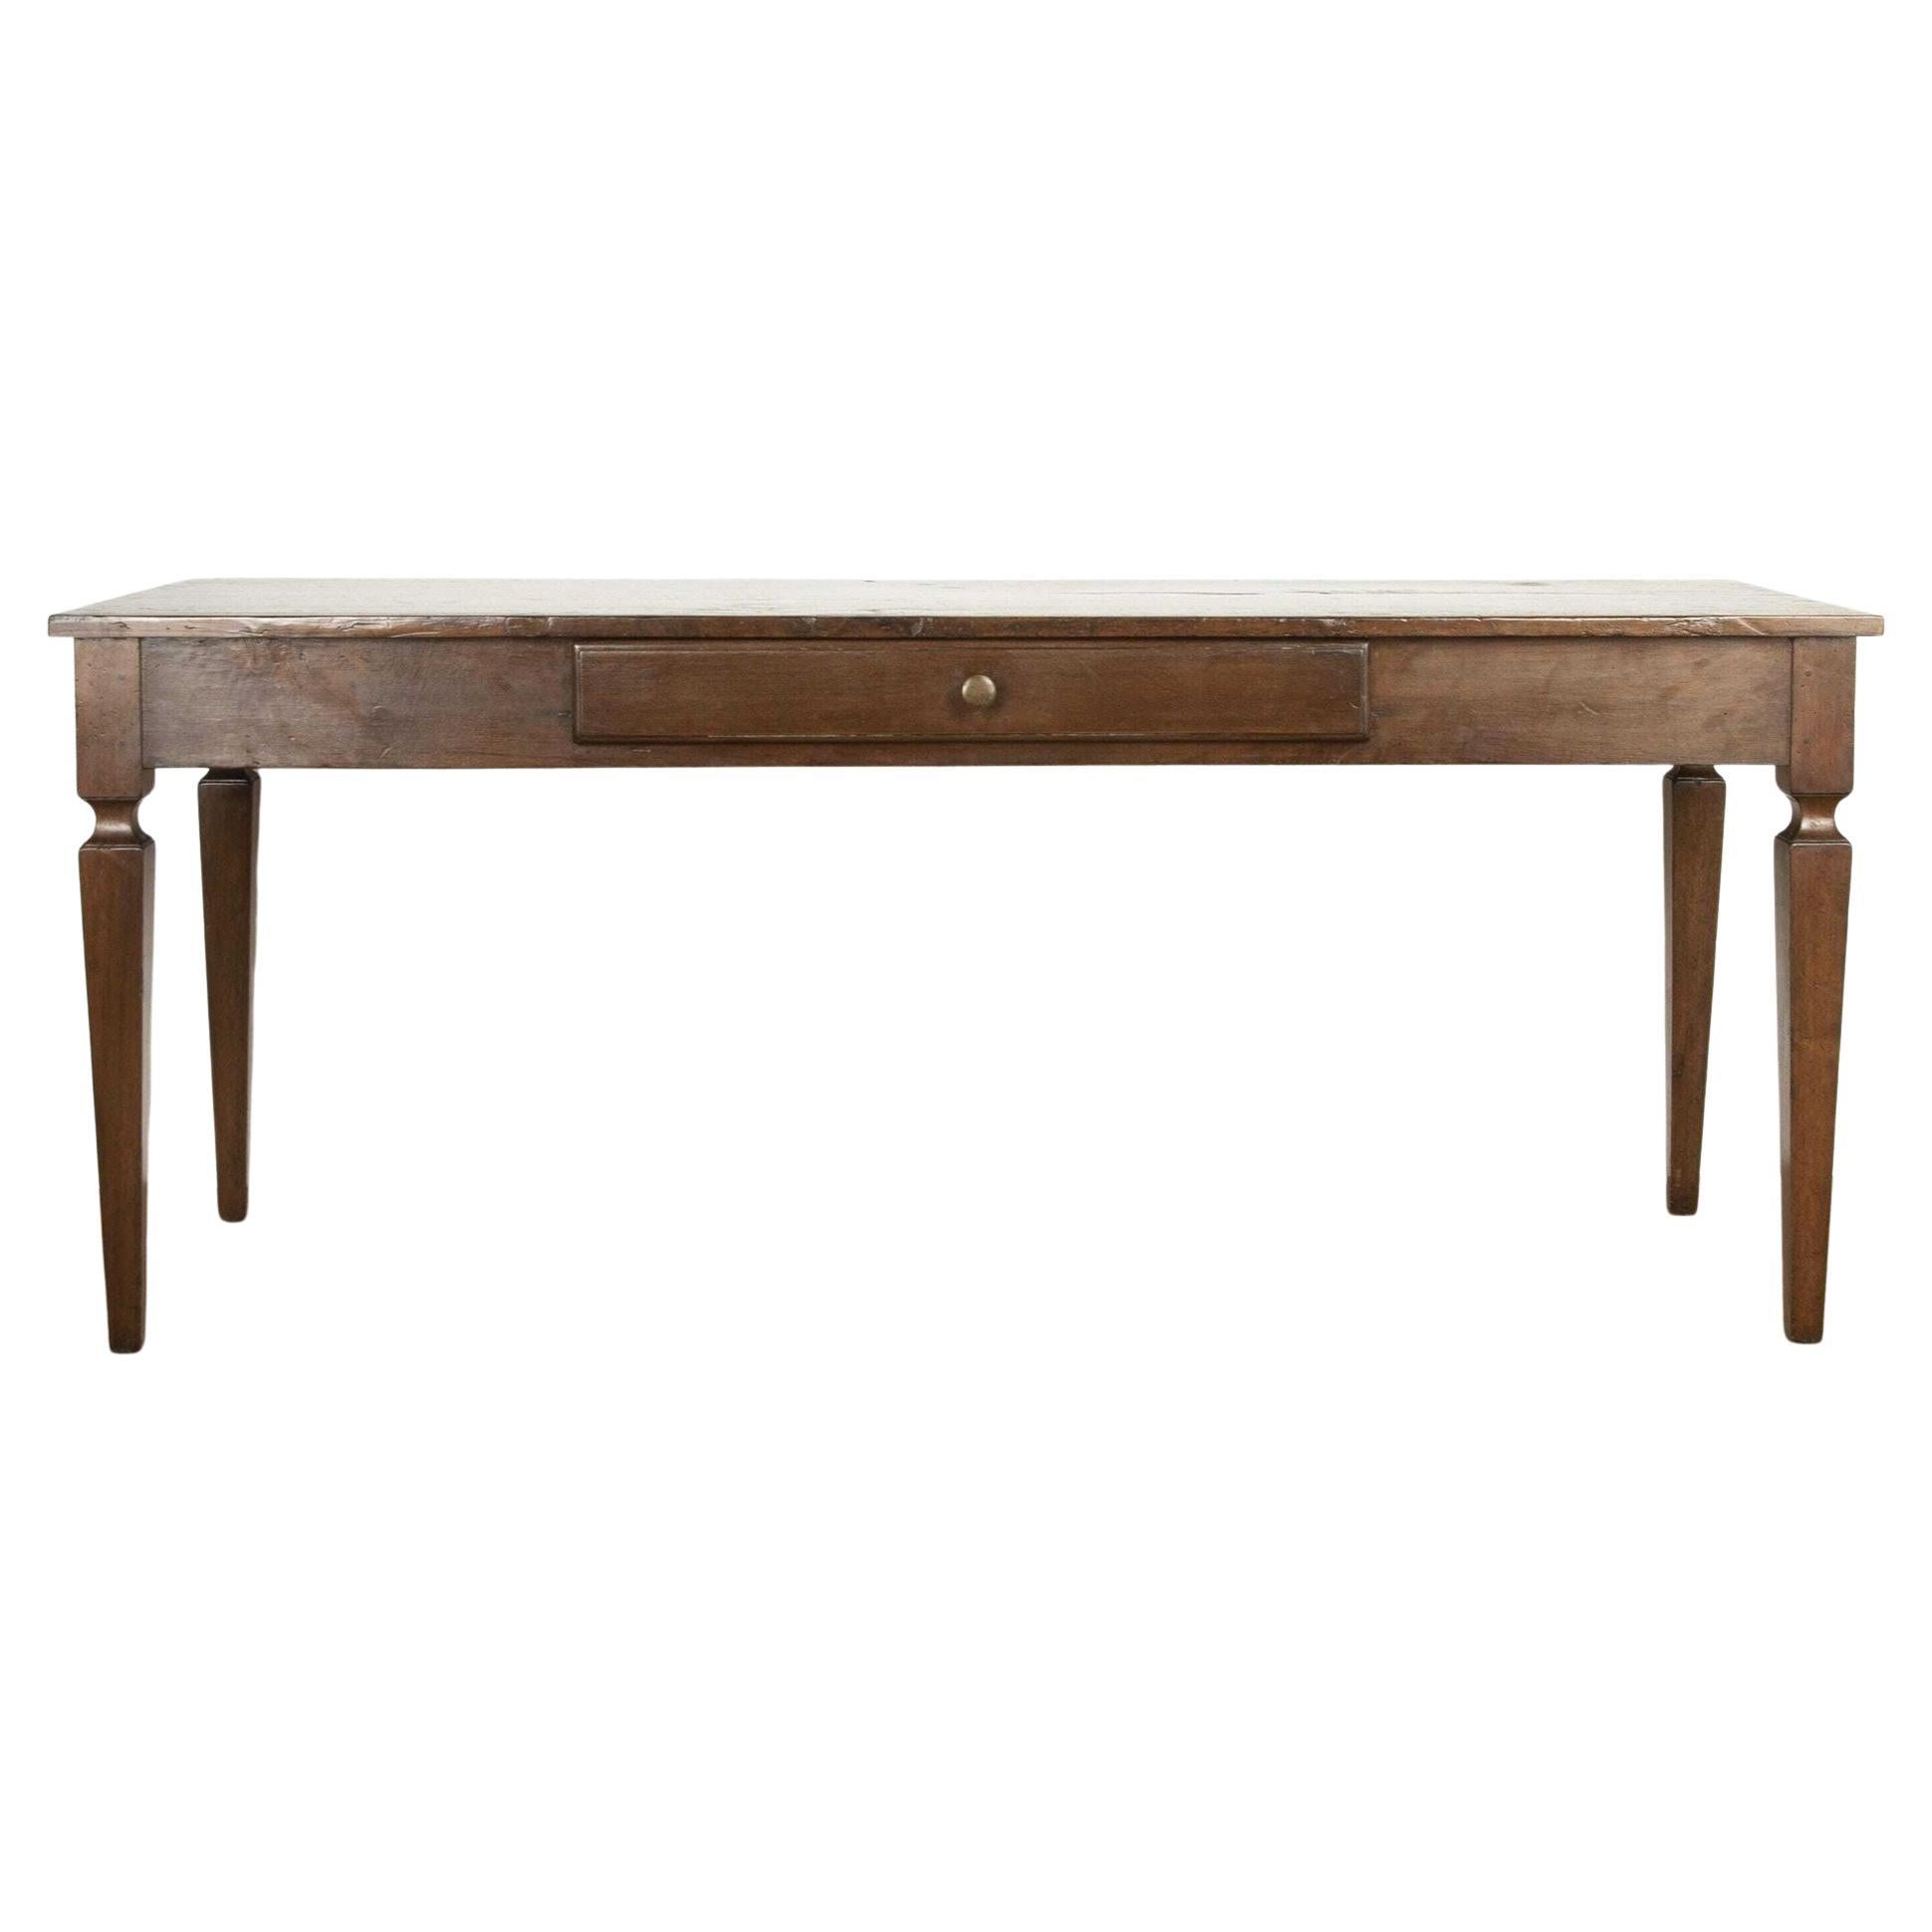 19th Century Italian Serving Table For Sale